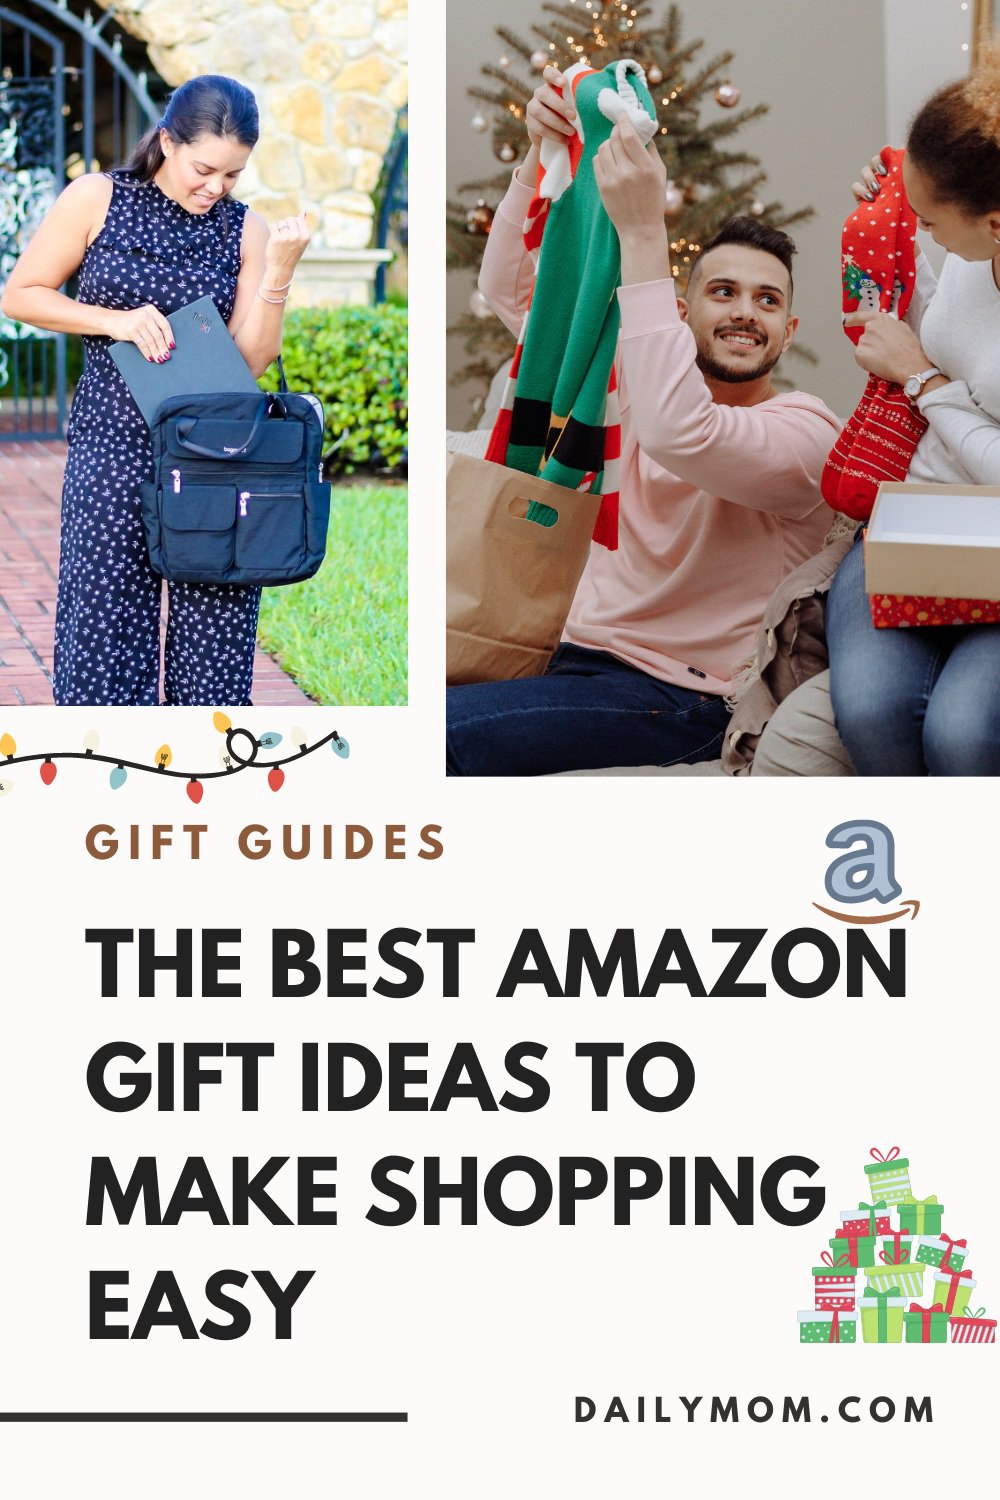 22 Of The Best Amazon Gift Ideas To Make Shopping Easy